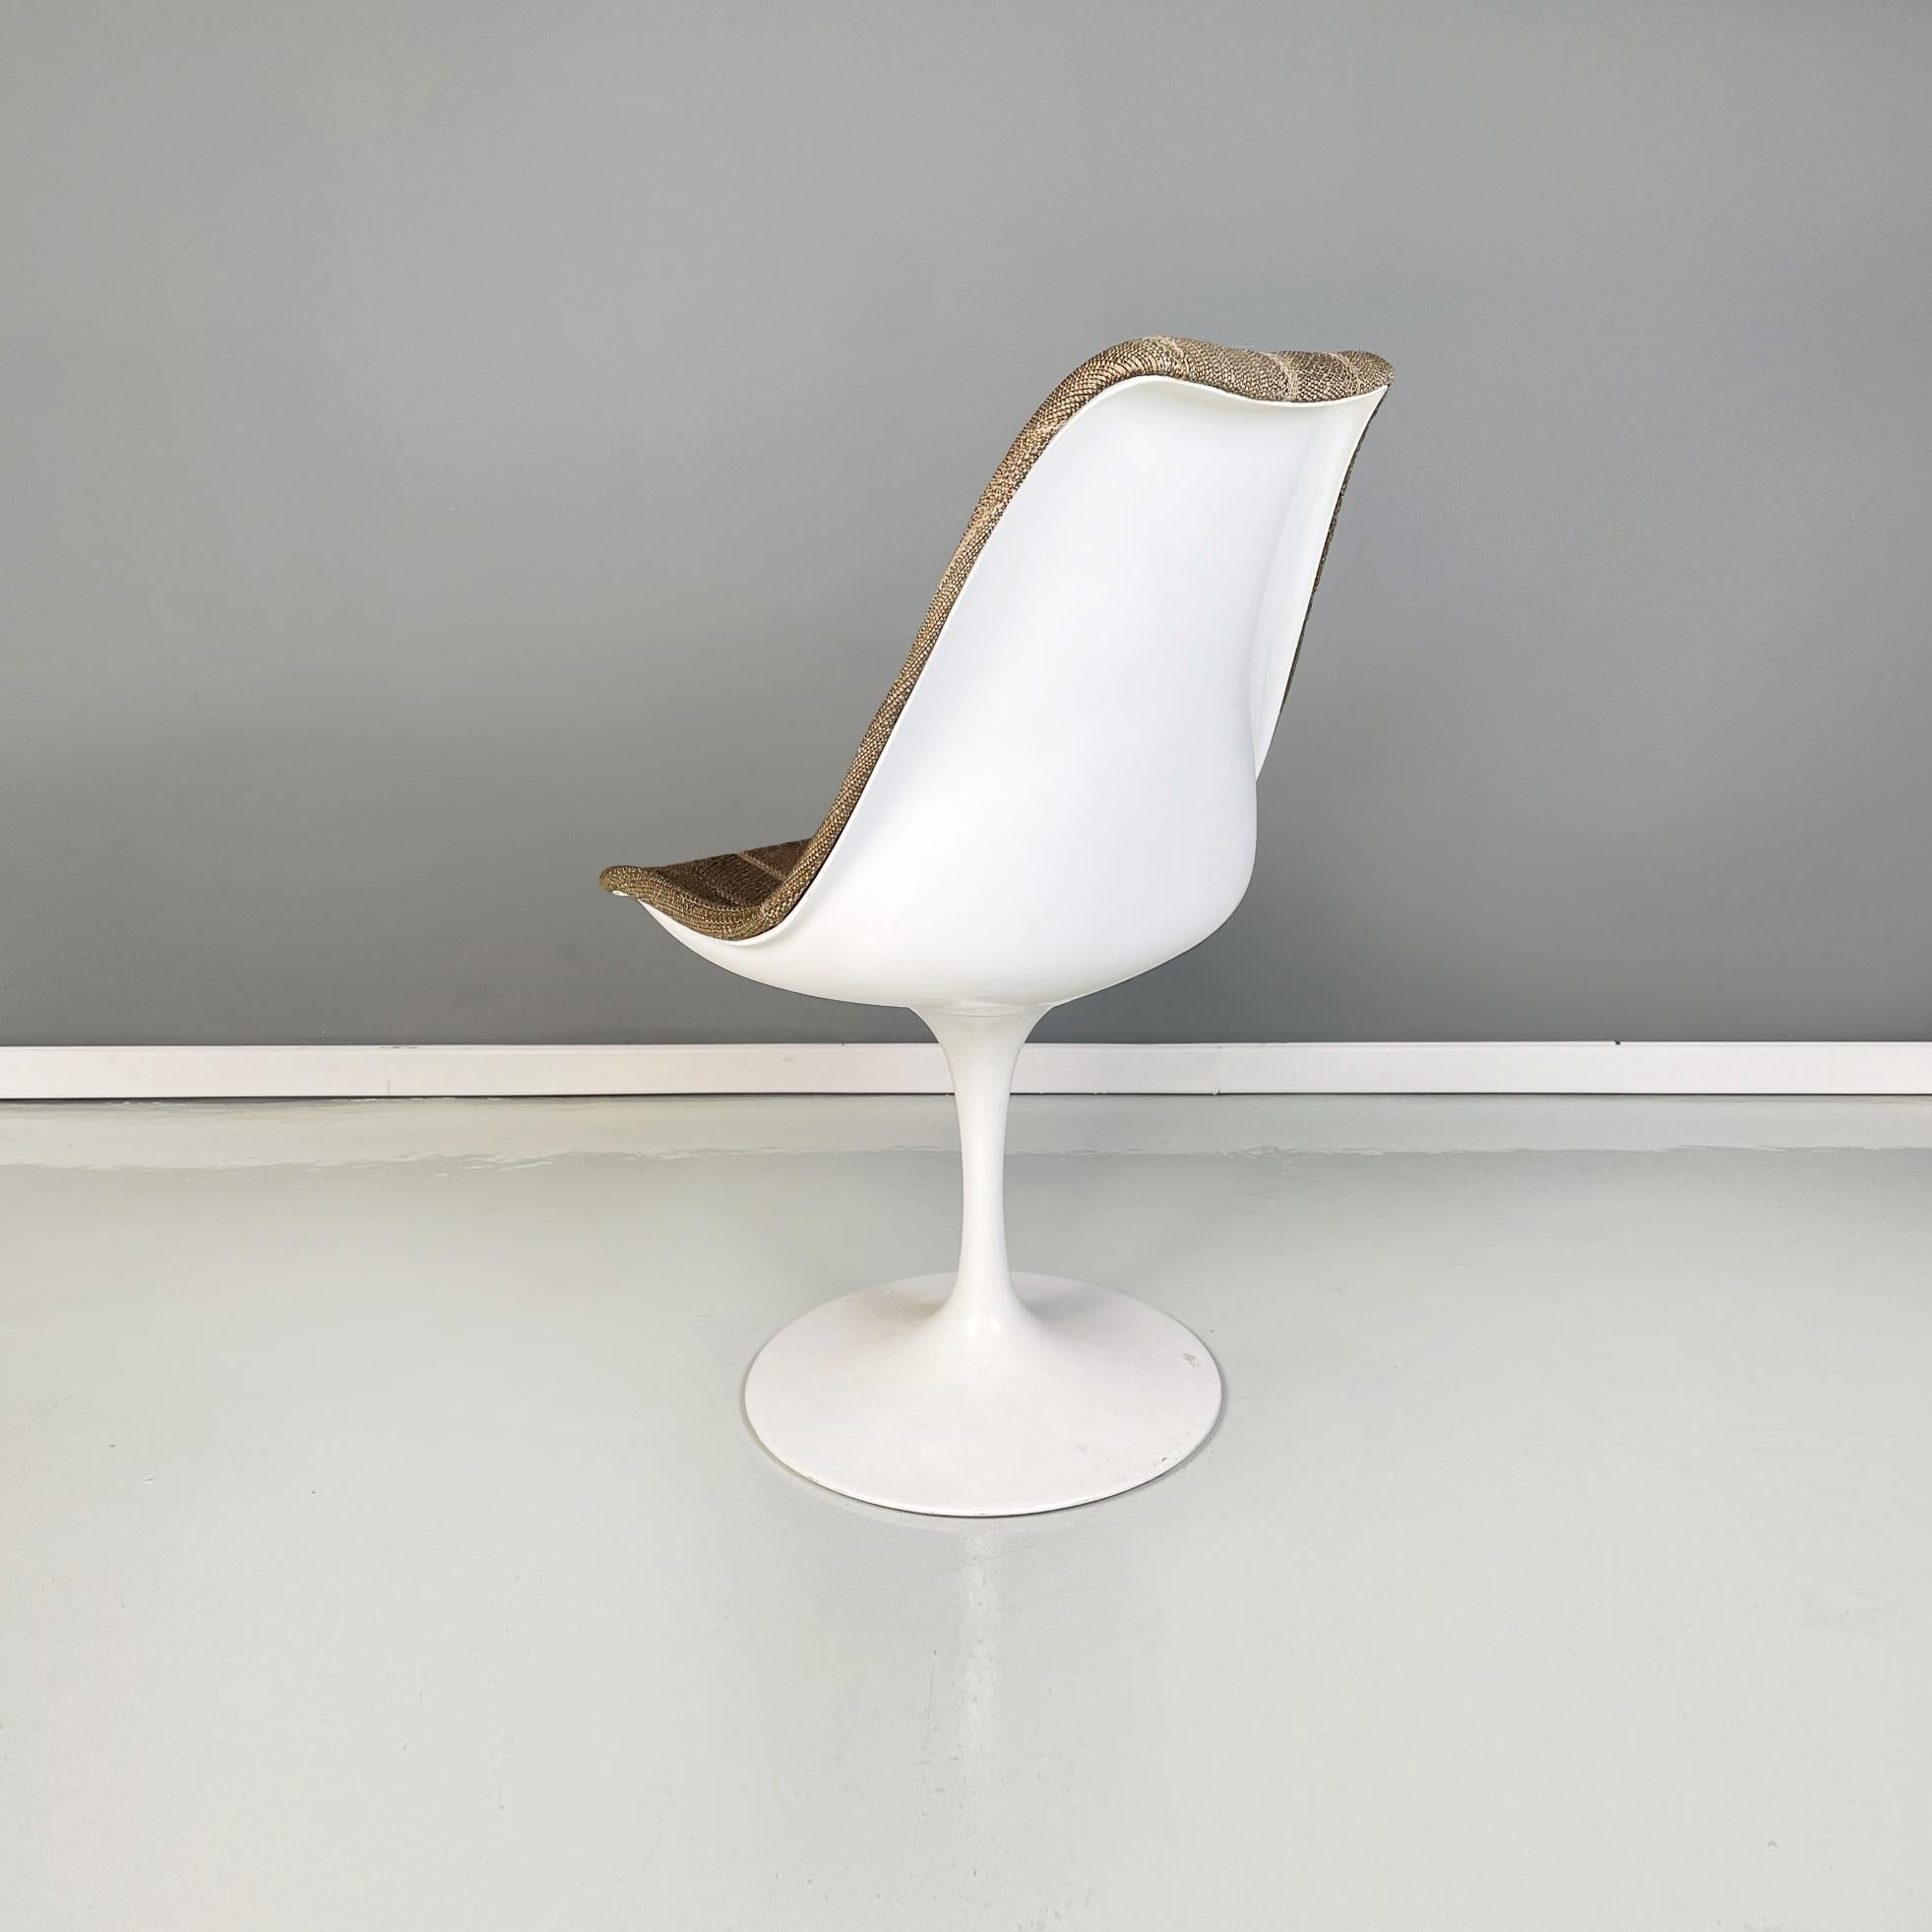 Late 20th Century American Space Age Brown Fabric Tulip Chair by Eero Saarinen for Knoll, 1970s